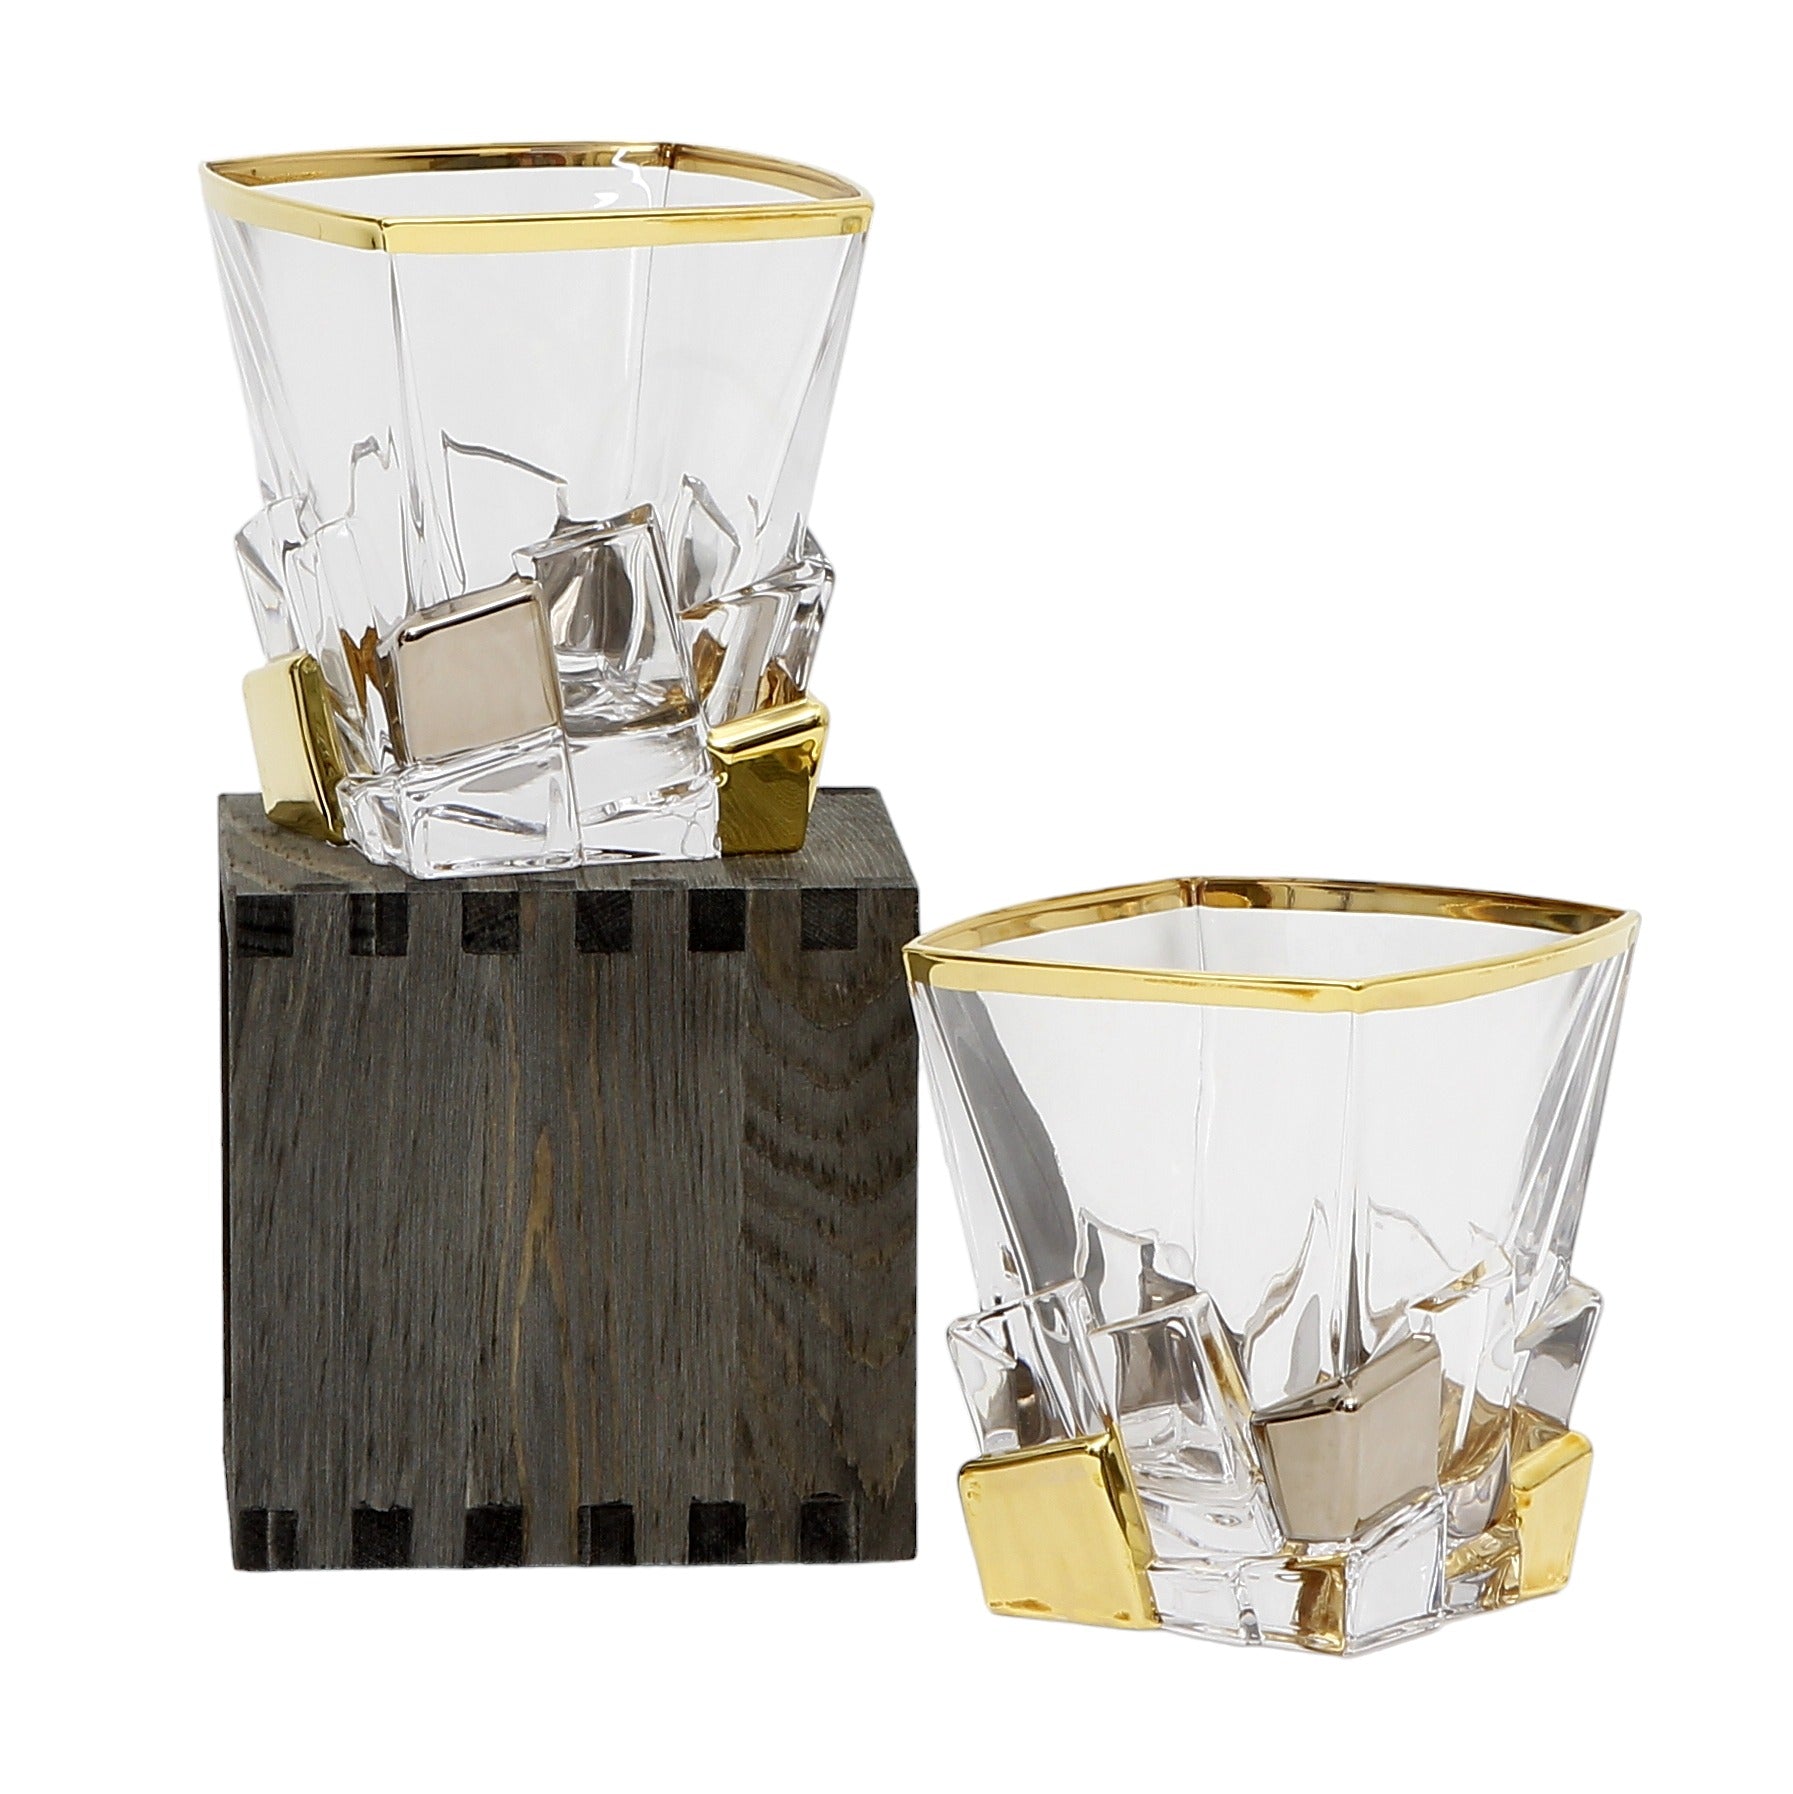 CRYSTAL GLASS: Exquisite Italian Crystal Square Glass for Whiskey/Old Fashion featuring a 24 Carat Gold Rim and Gold/Platinum Accents.